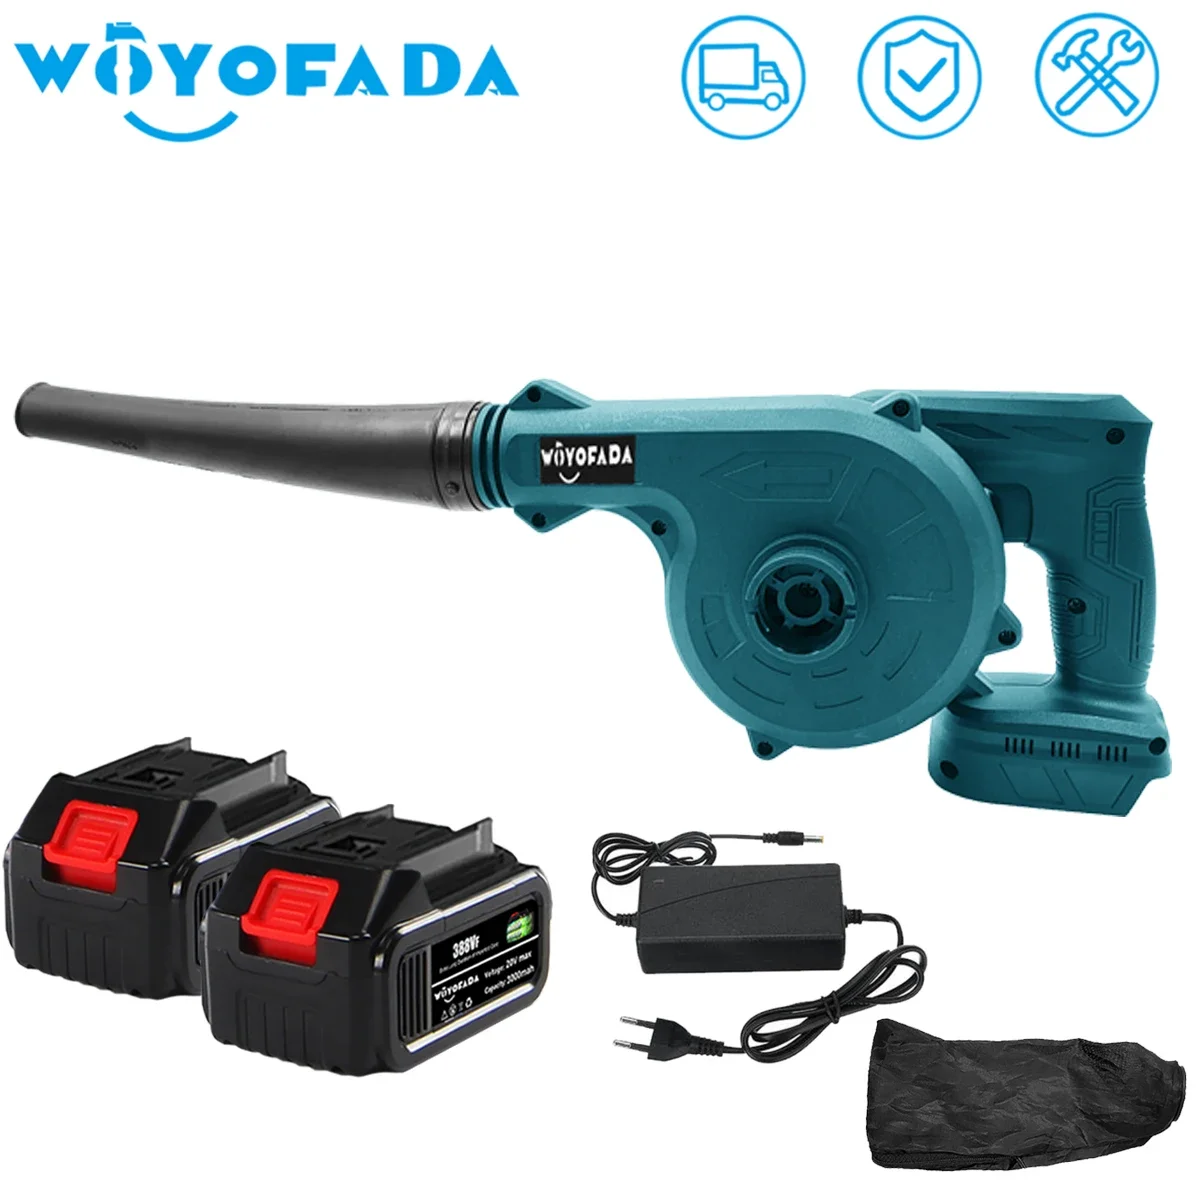 2 In 1 Cordless Electric Air Blower Vacuum Cleannig Blower Blowing & Suction Leaf Dust Collector For Makita 18V Battery kanduo 21v cordless snail fan camping fire blower large battery turbine pumping and blowing 2 in 1 compatible makita18v battery